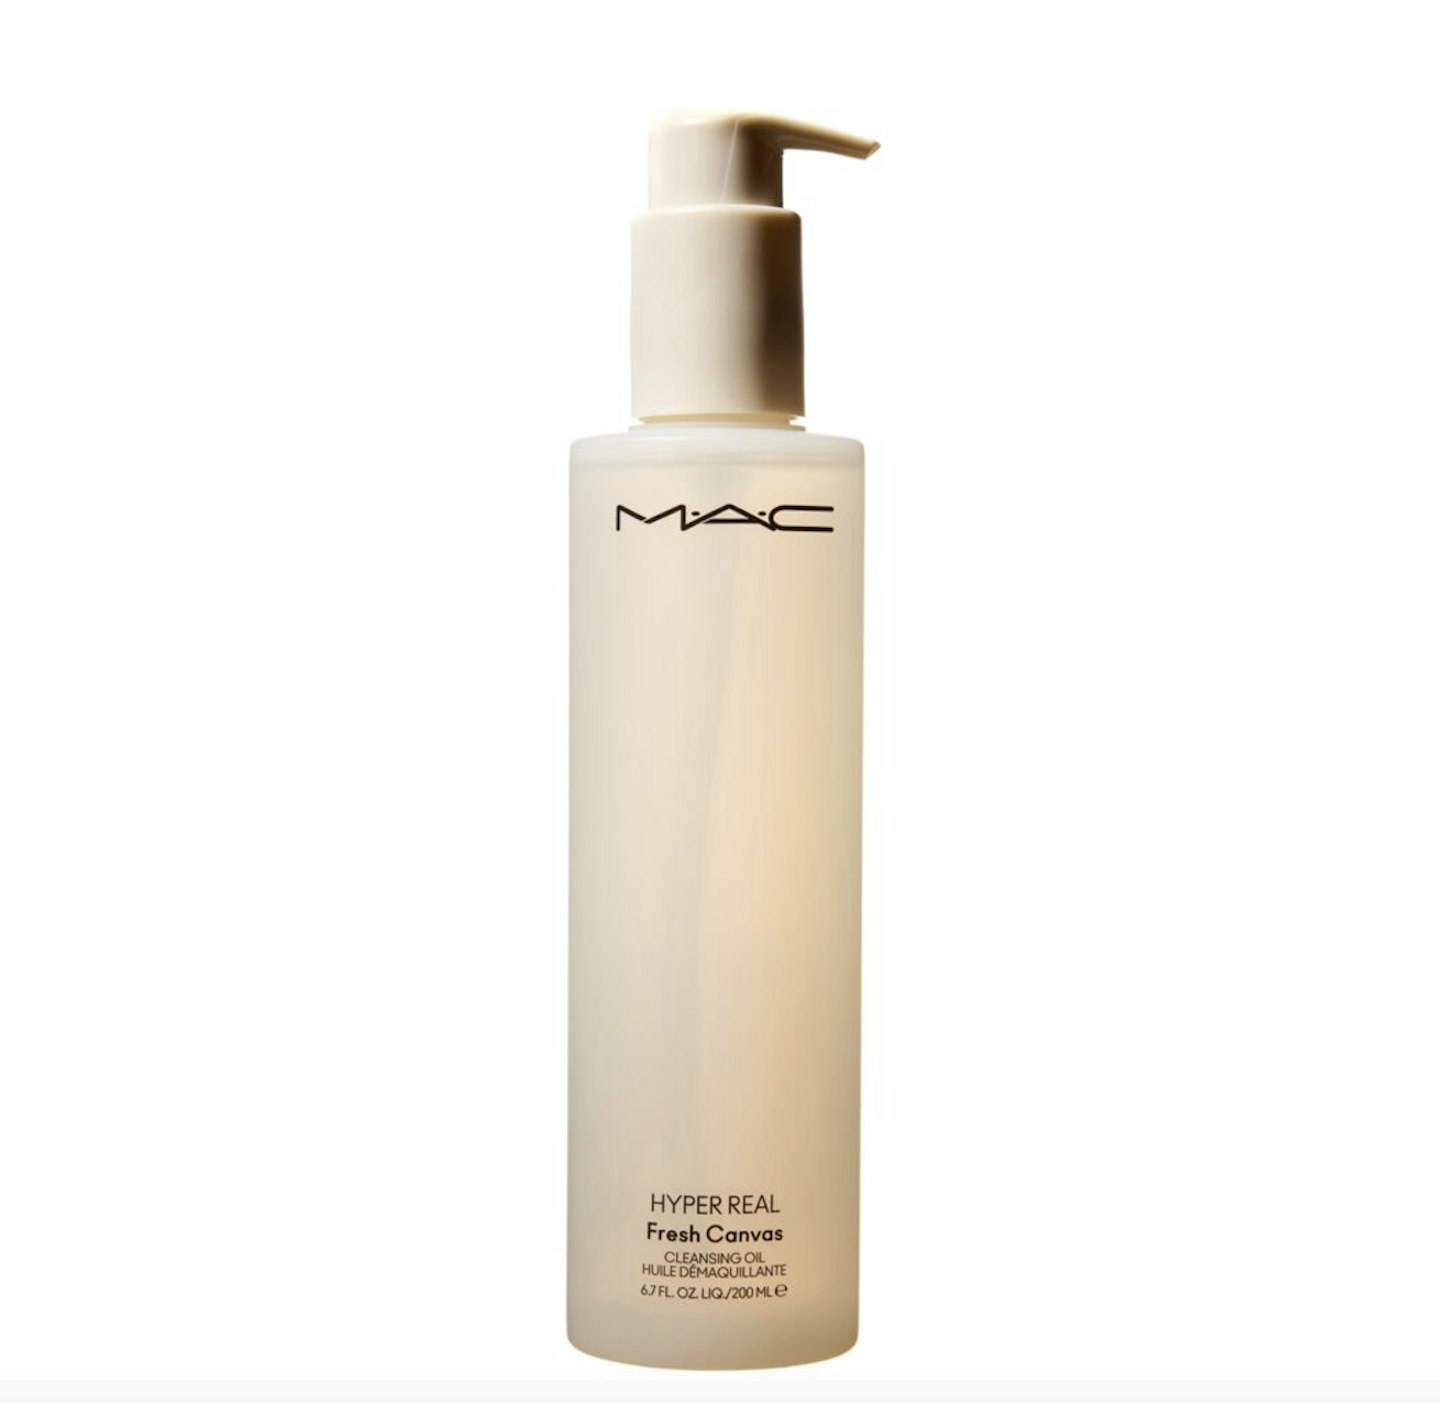 GENIUS MAKE-UP REMOVER: MAC COSMETICS HYPER REAL FRESH CANVAS CLEANSING OIL